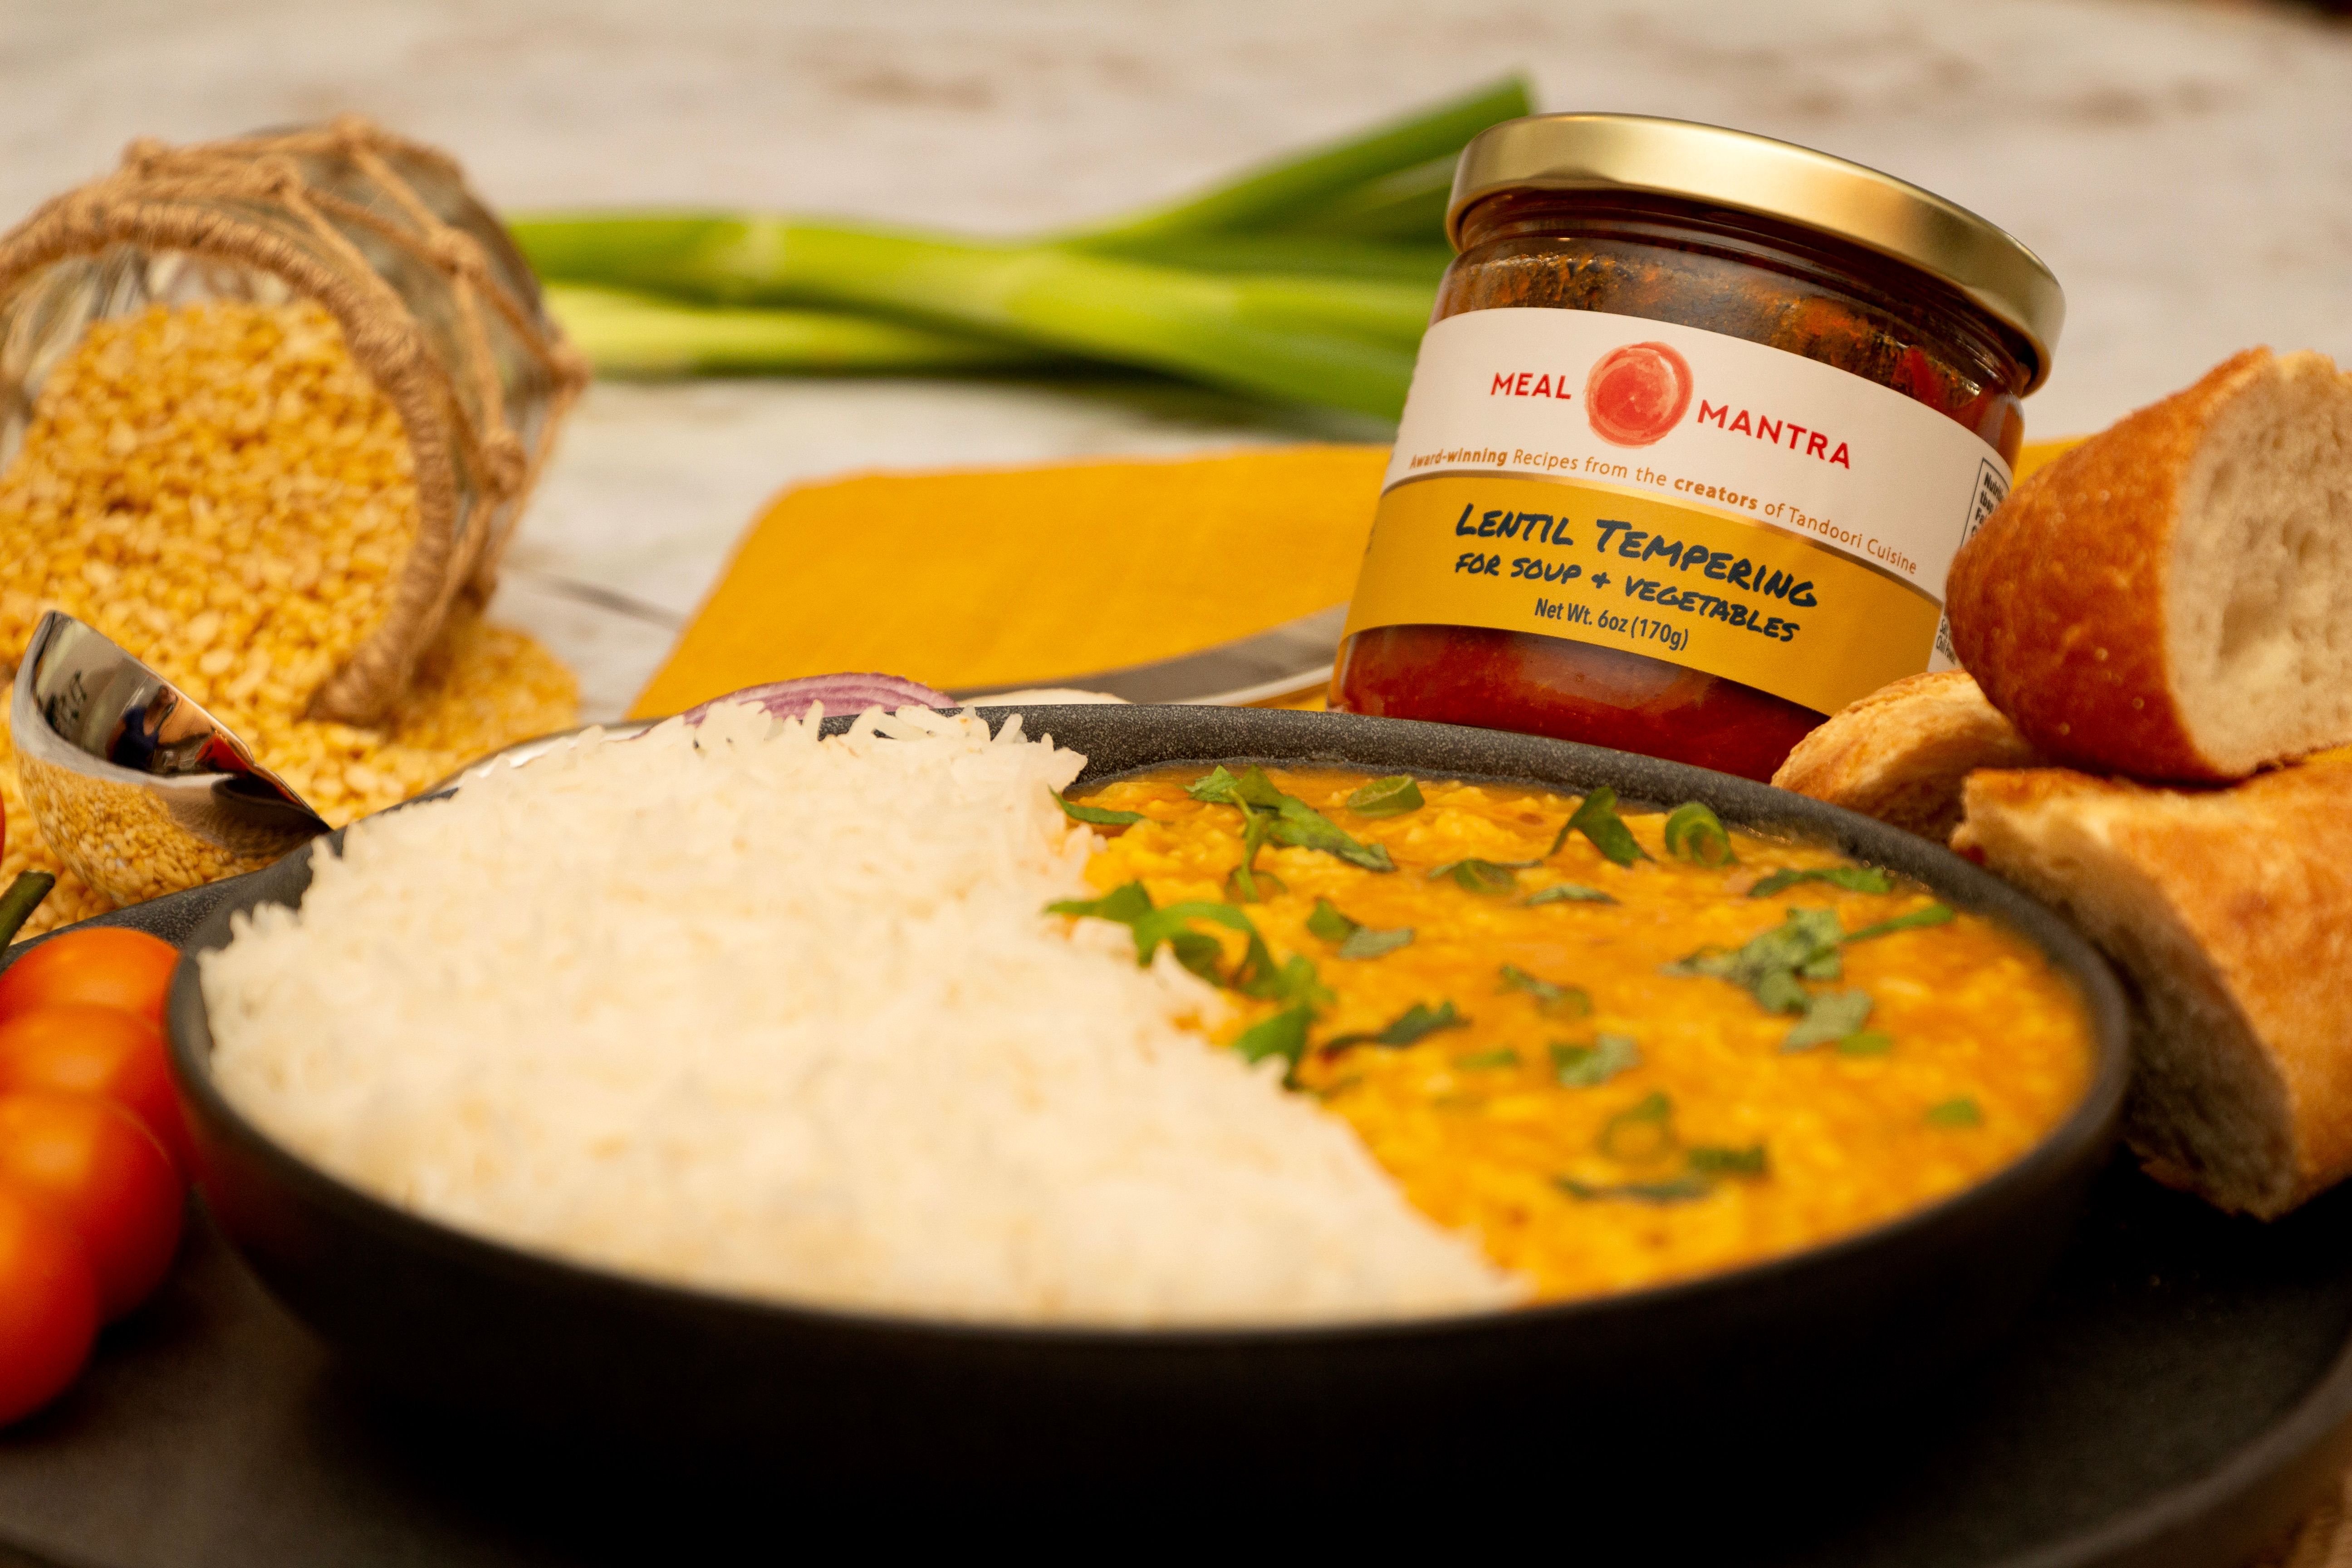 Meal Mantra Chutney Dips, Korma & a Unique Lentil Tempering Cooking Sauce